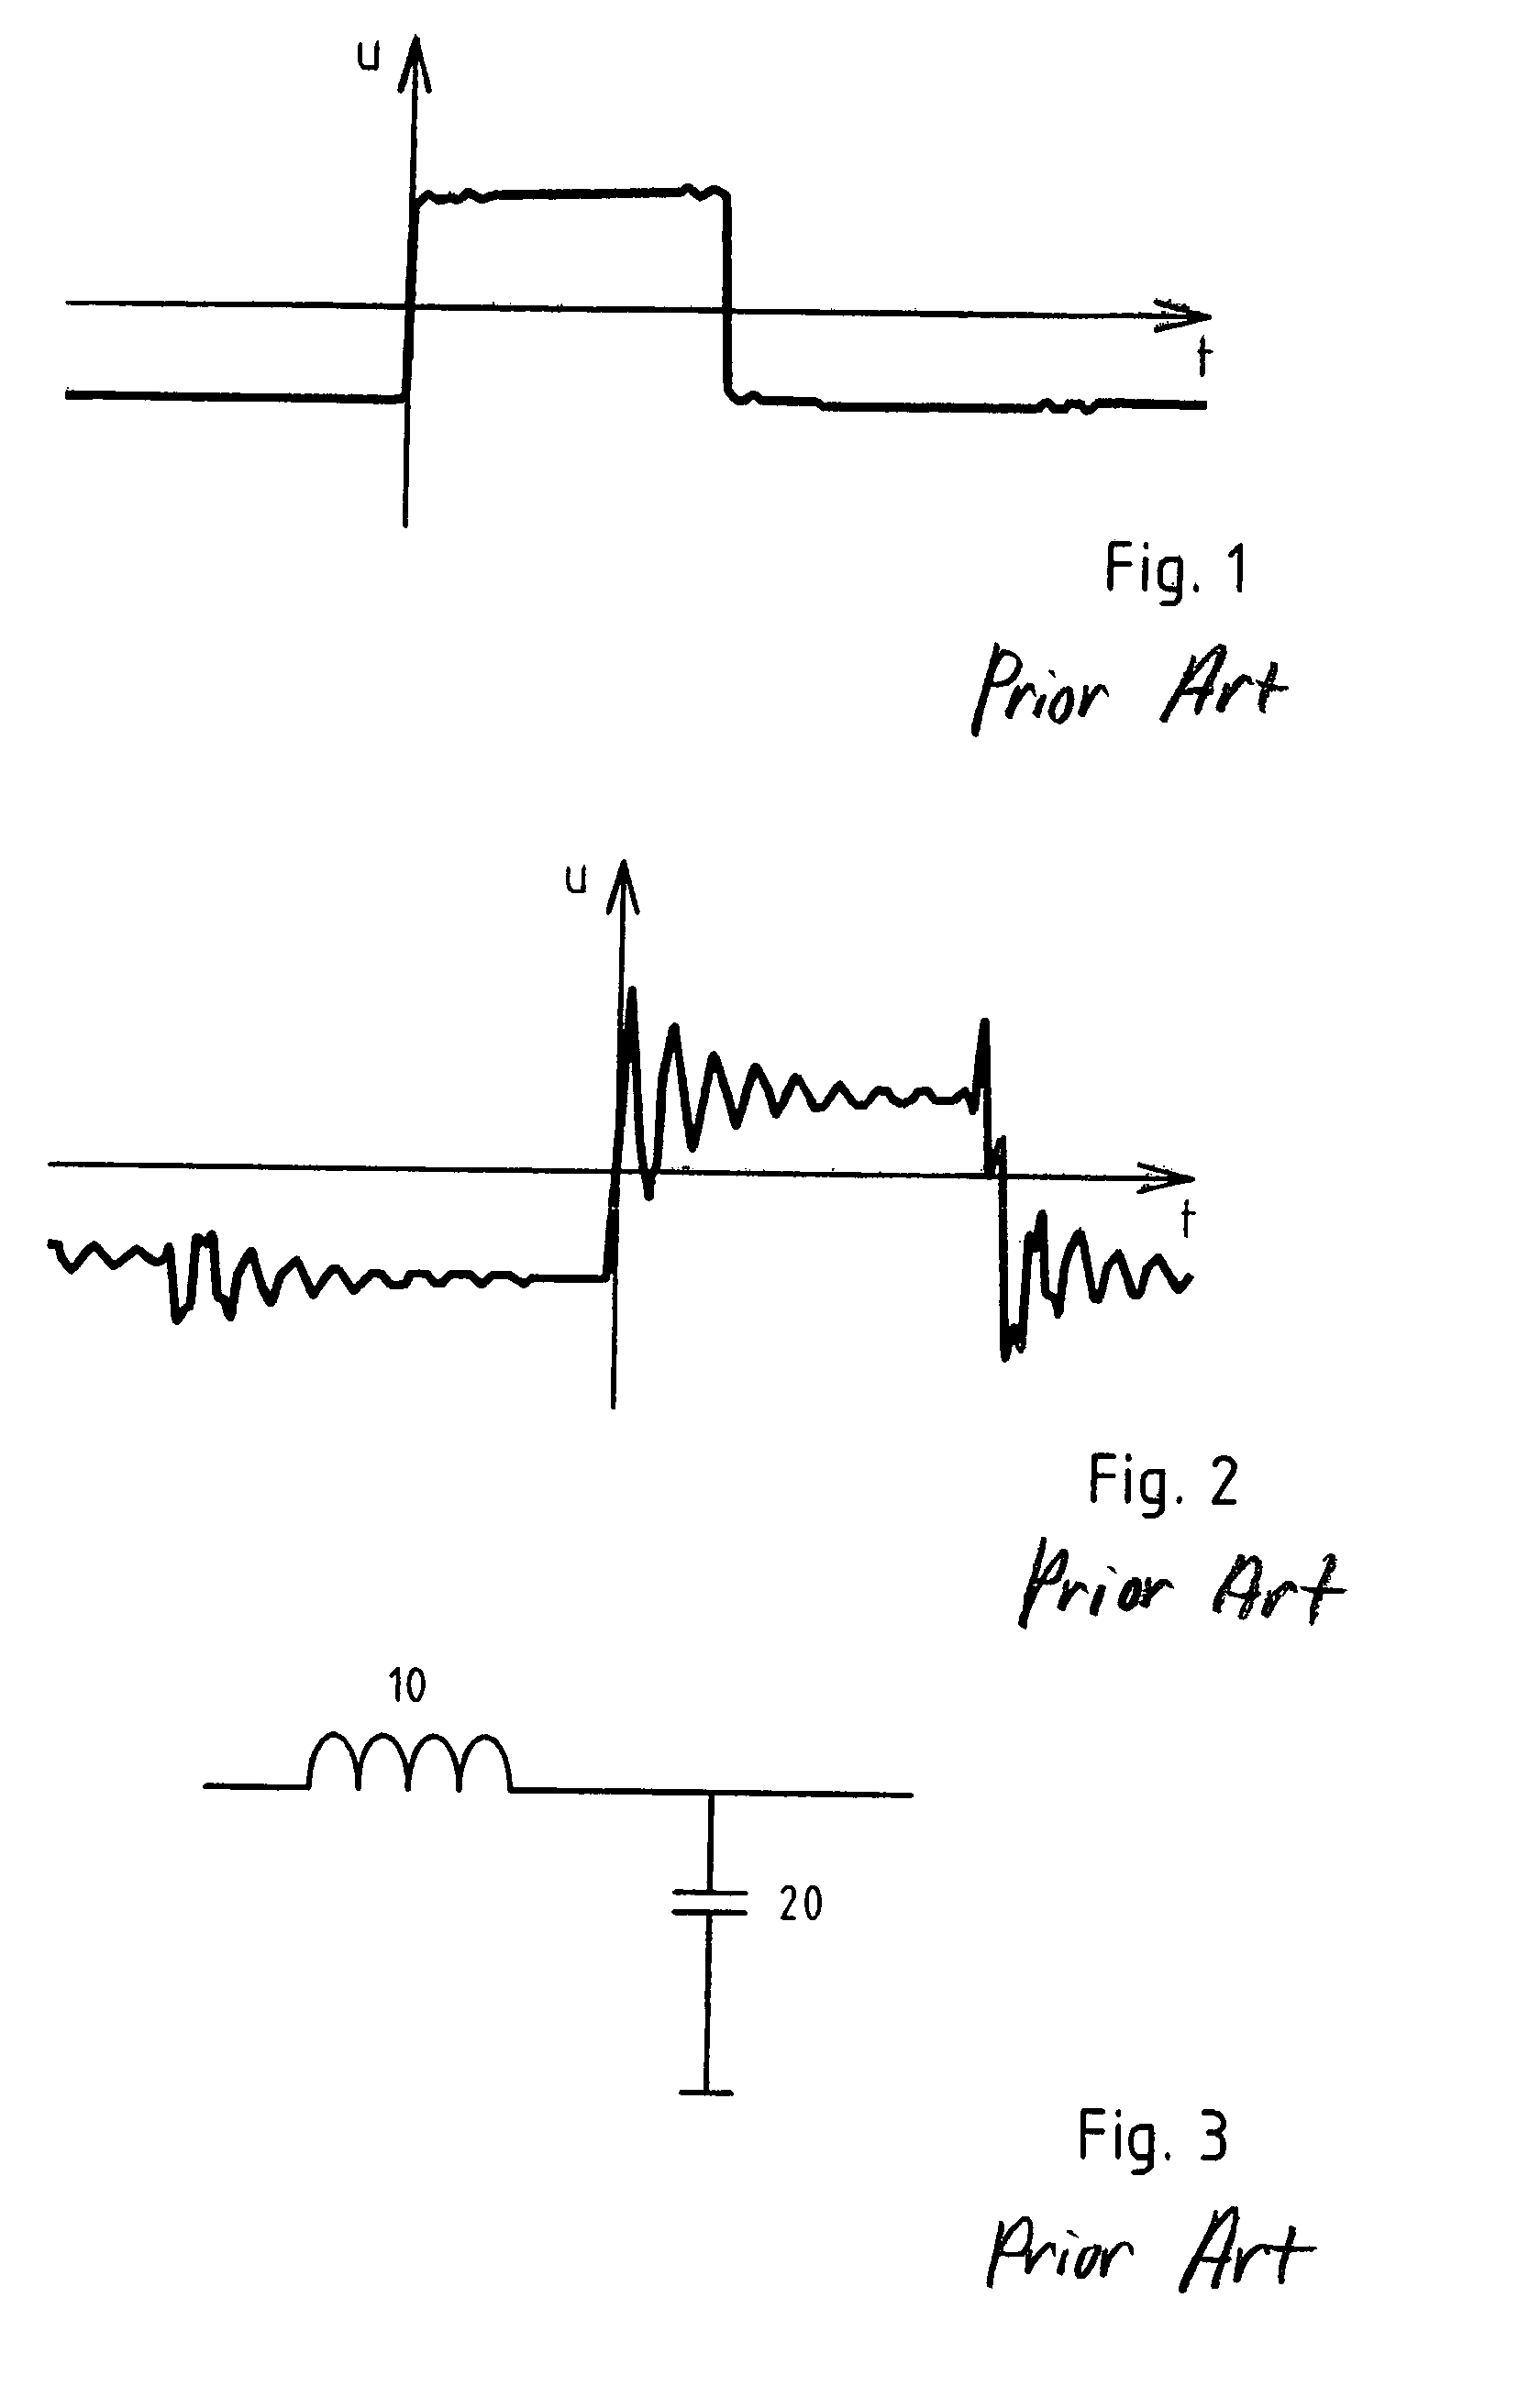 Filter network for motor control systems